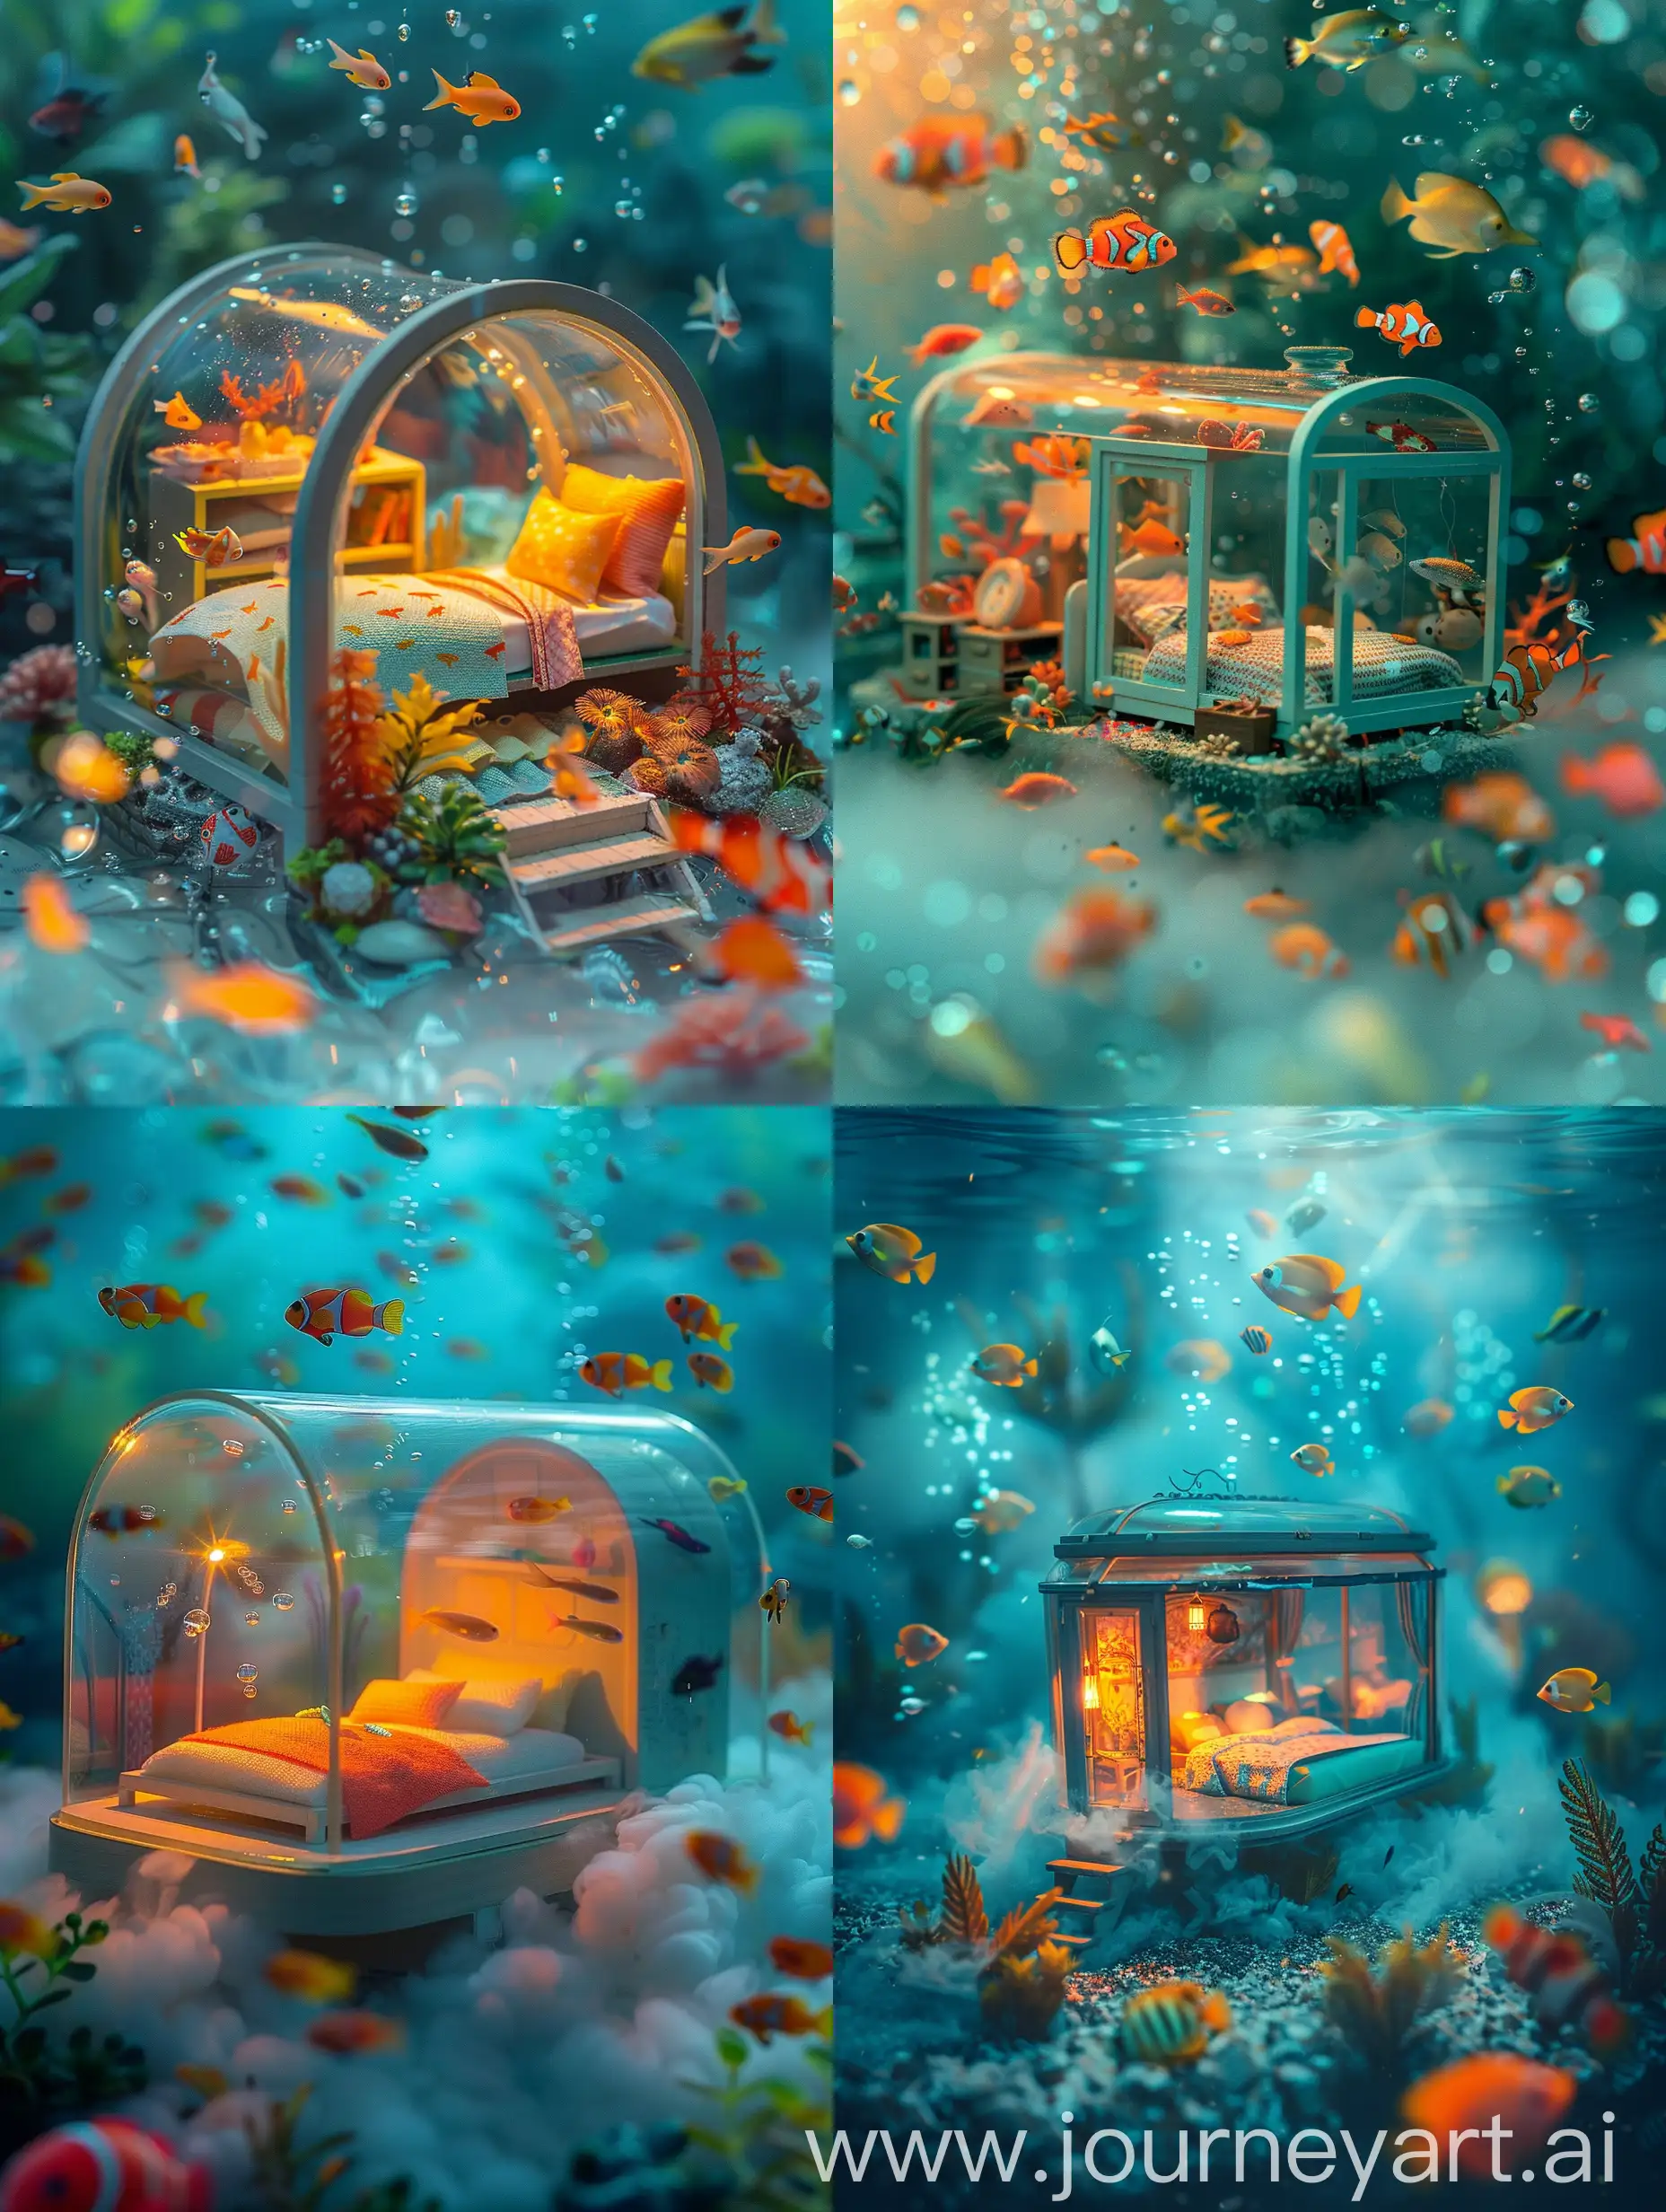 Enchanting-Underwater-Glass-Bedroom-with-Tropical-Fish-and-Colorful-Lighting